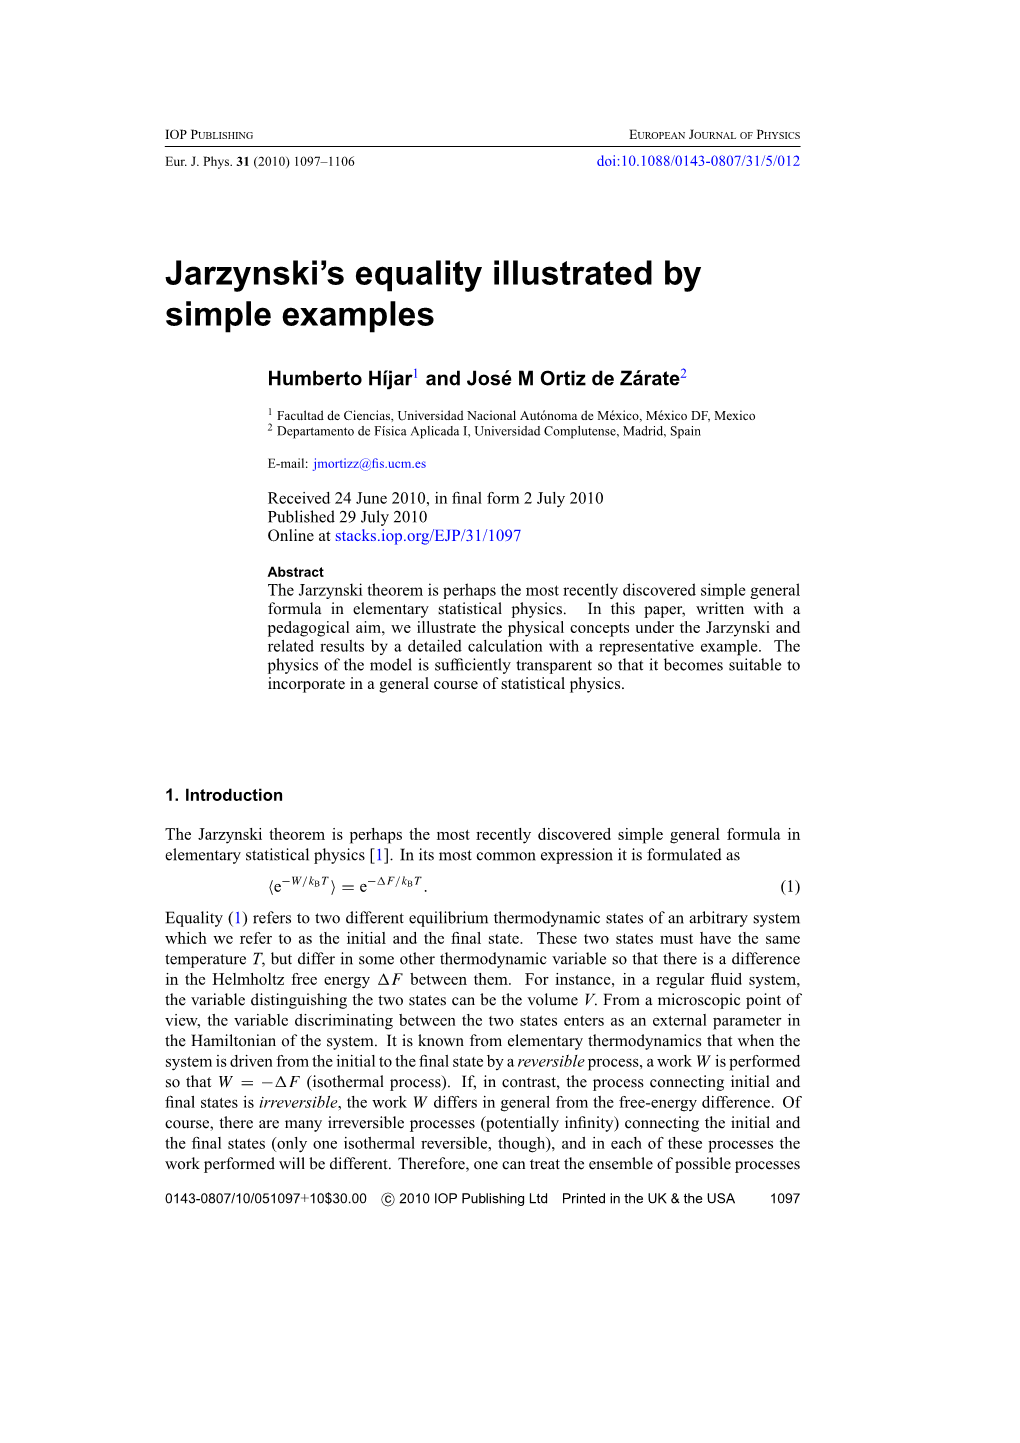 Jarzynski's Equality Illustrated by Simple Examples